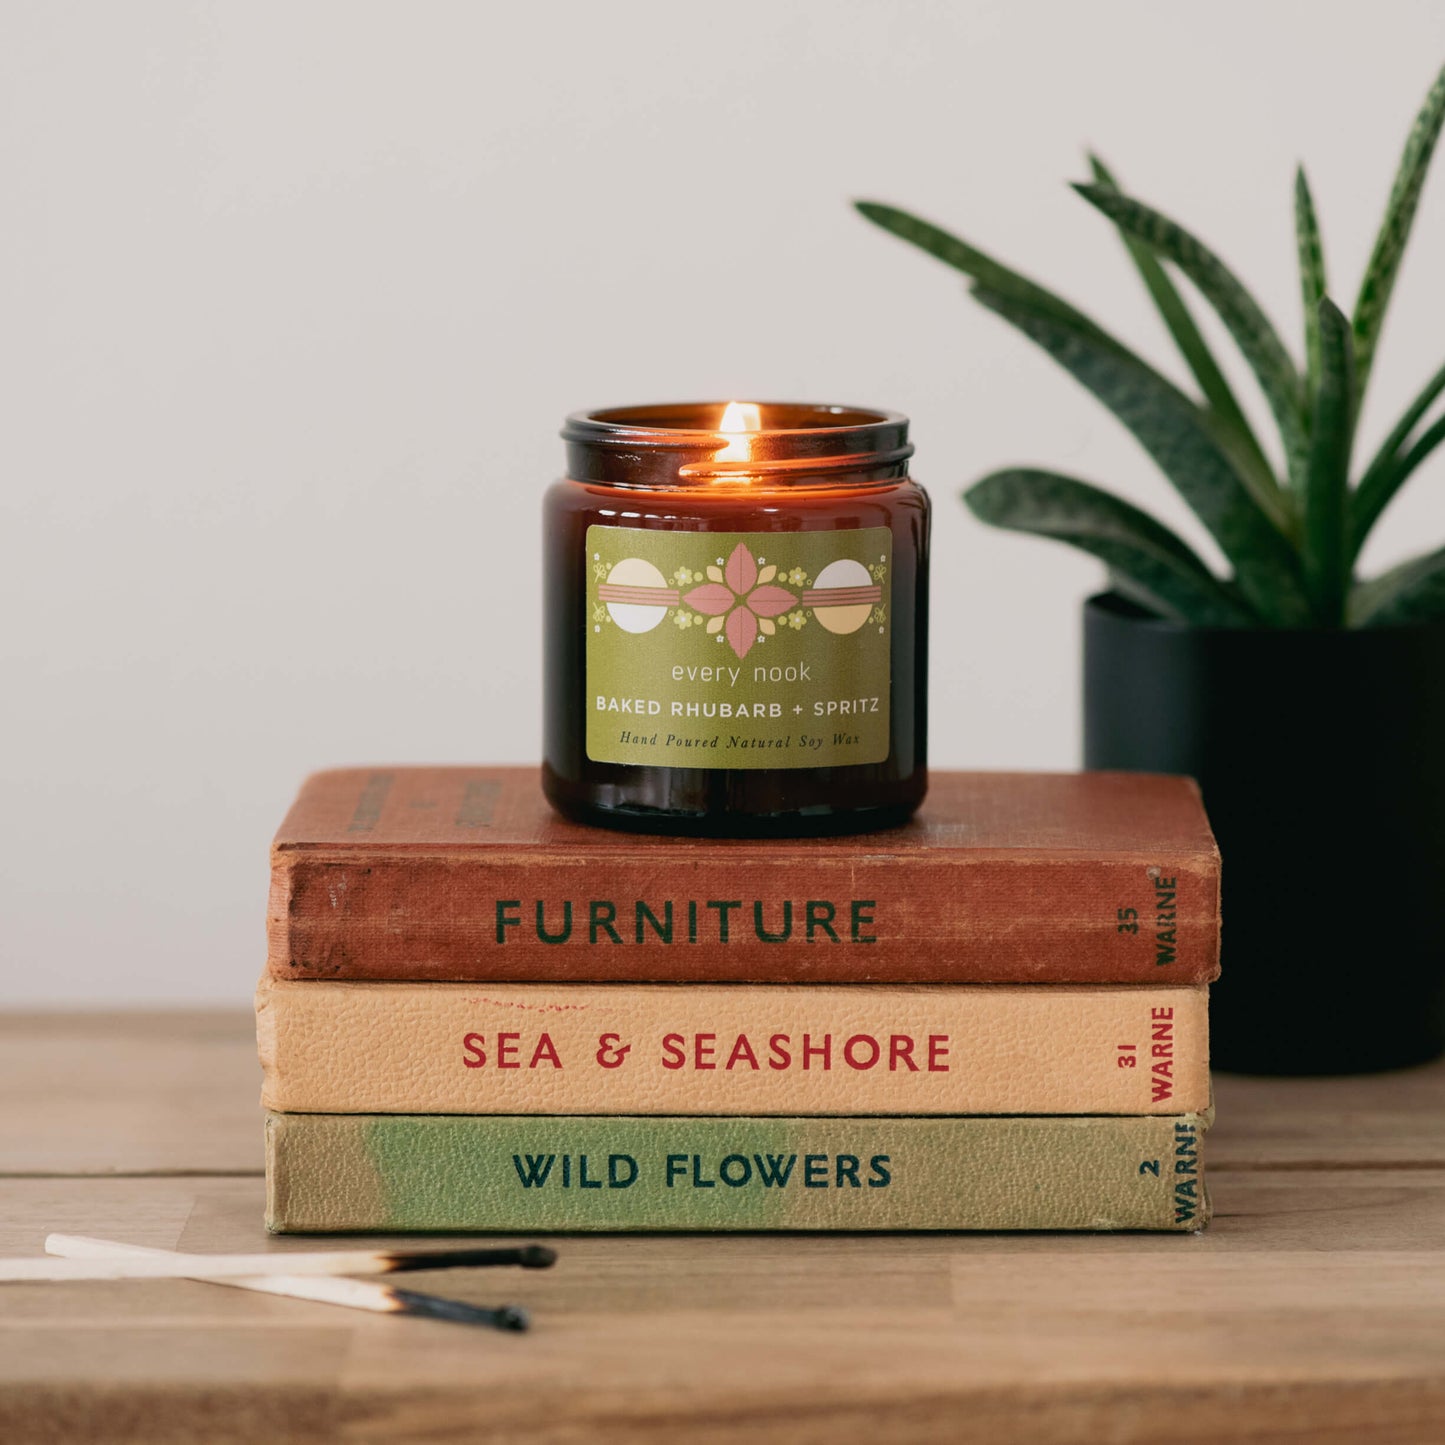 Baked Rhubarb + Spritz small scented candle